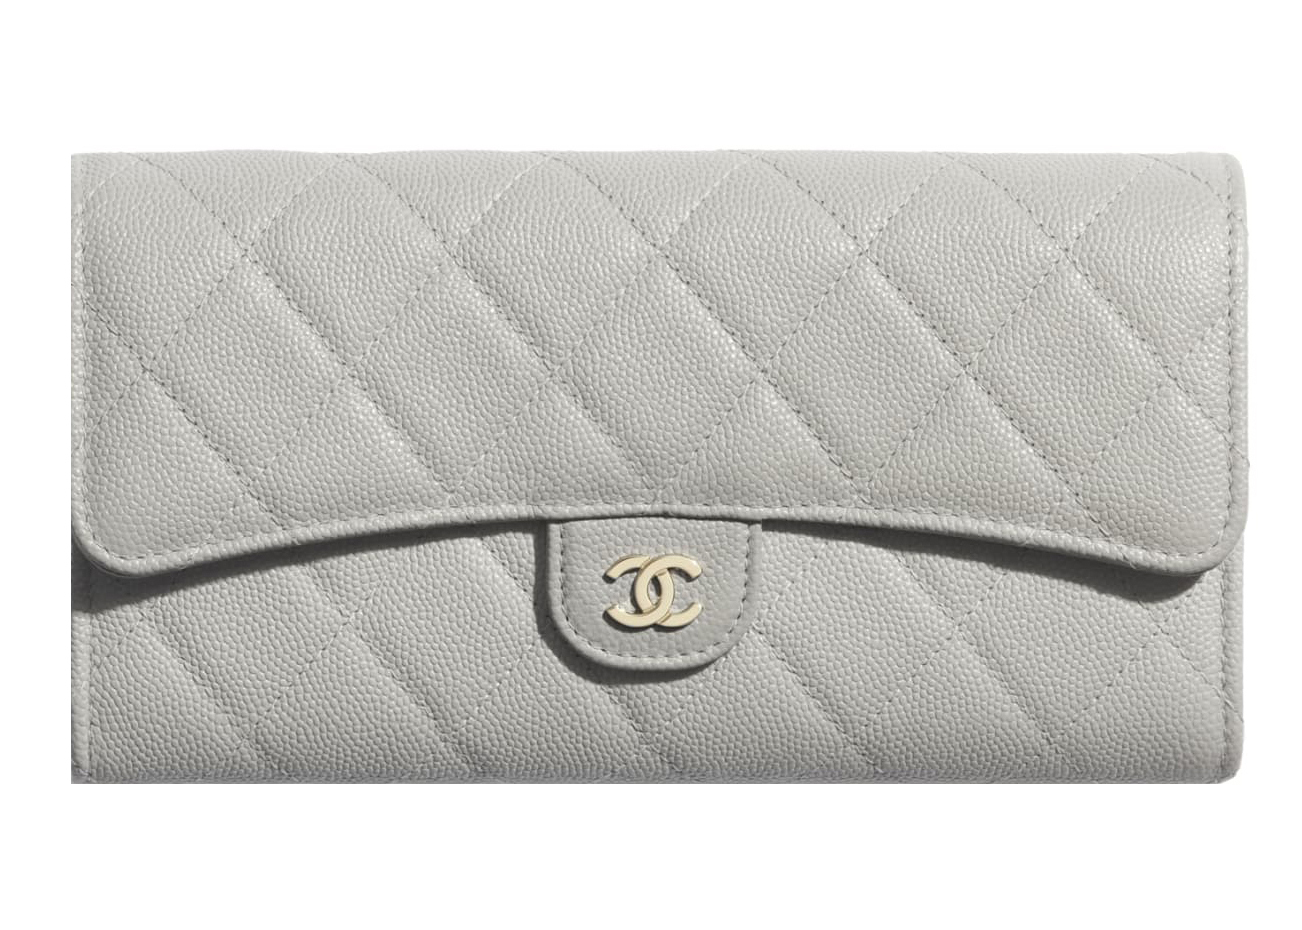 Chanel Wallet Price Guide How much are Chanel wallets worth now